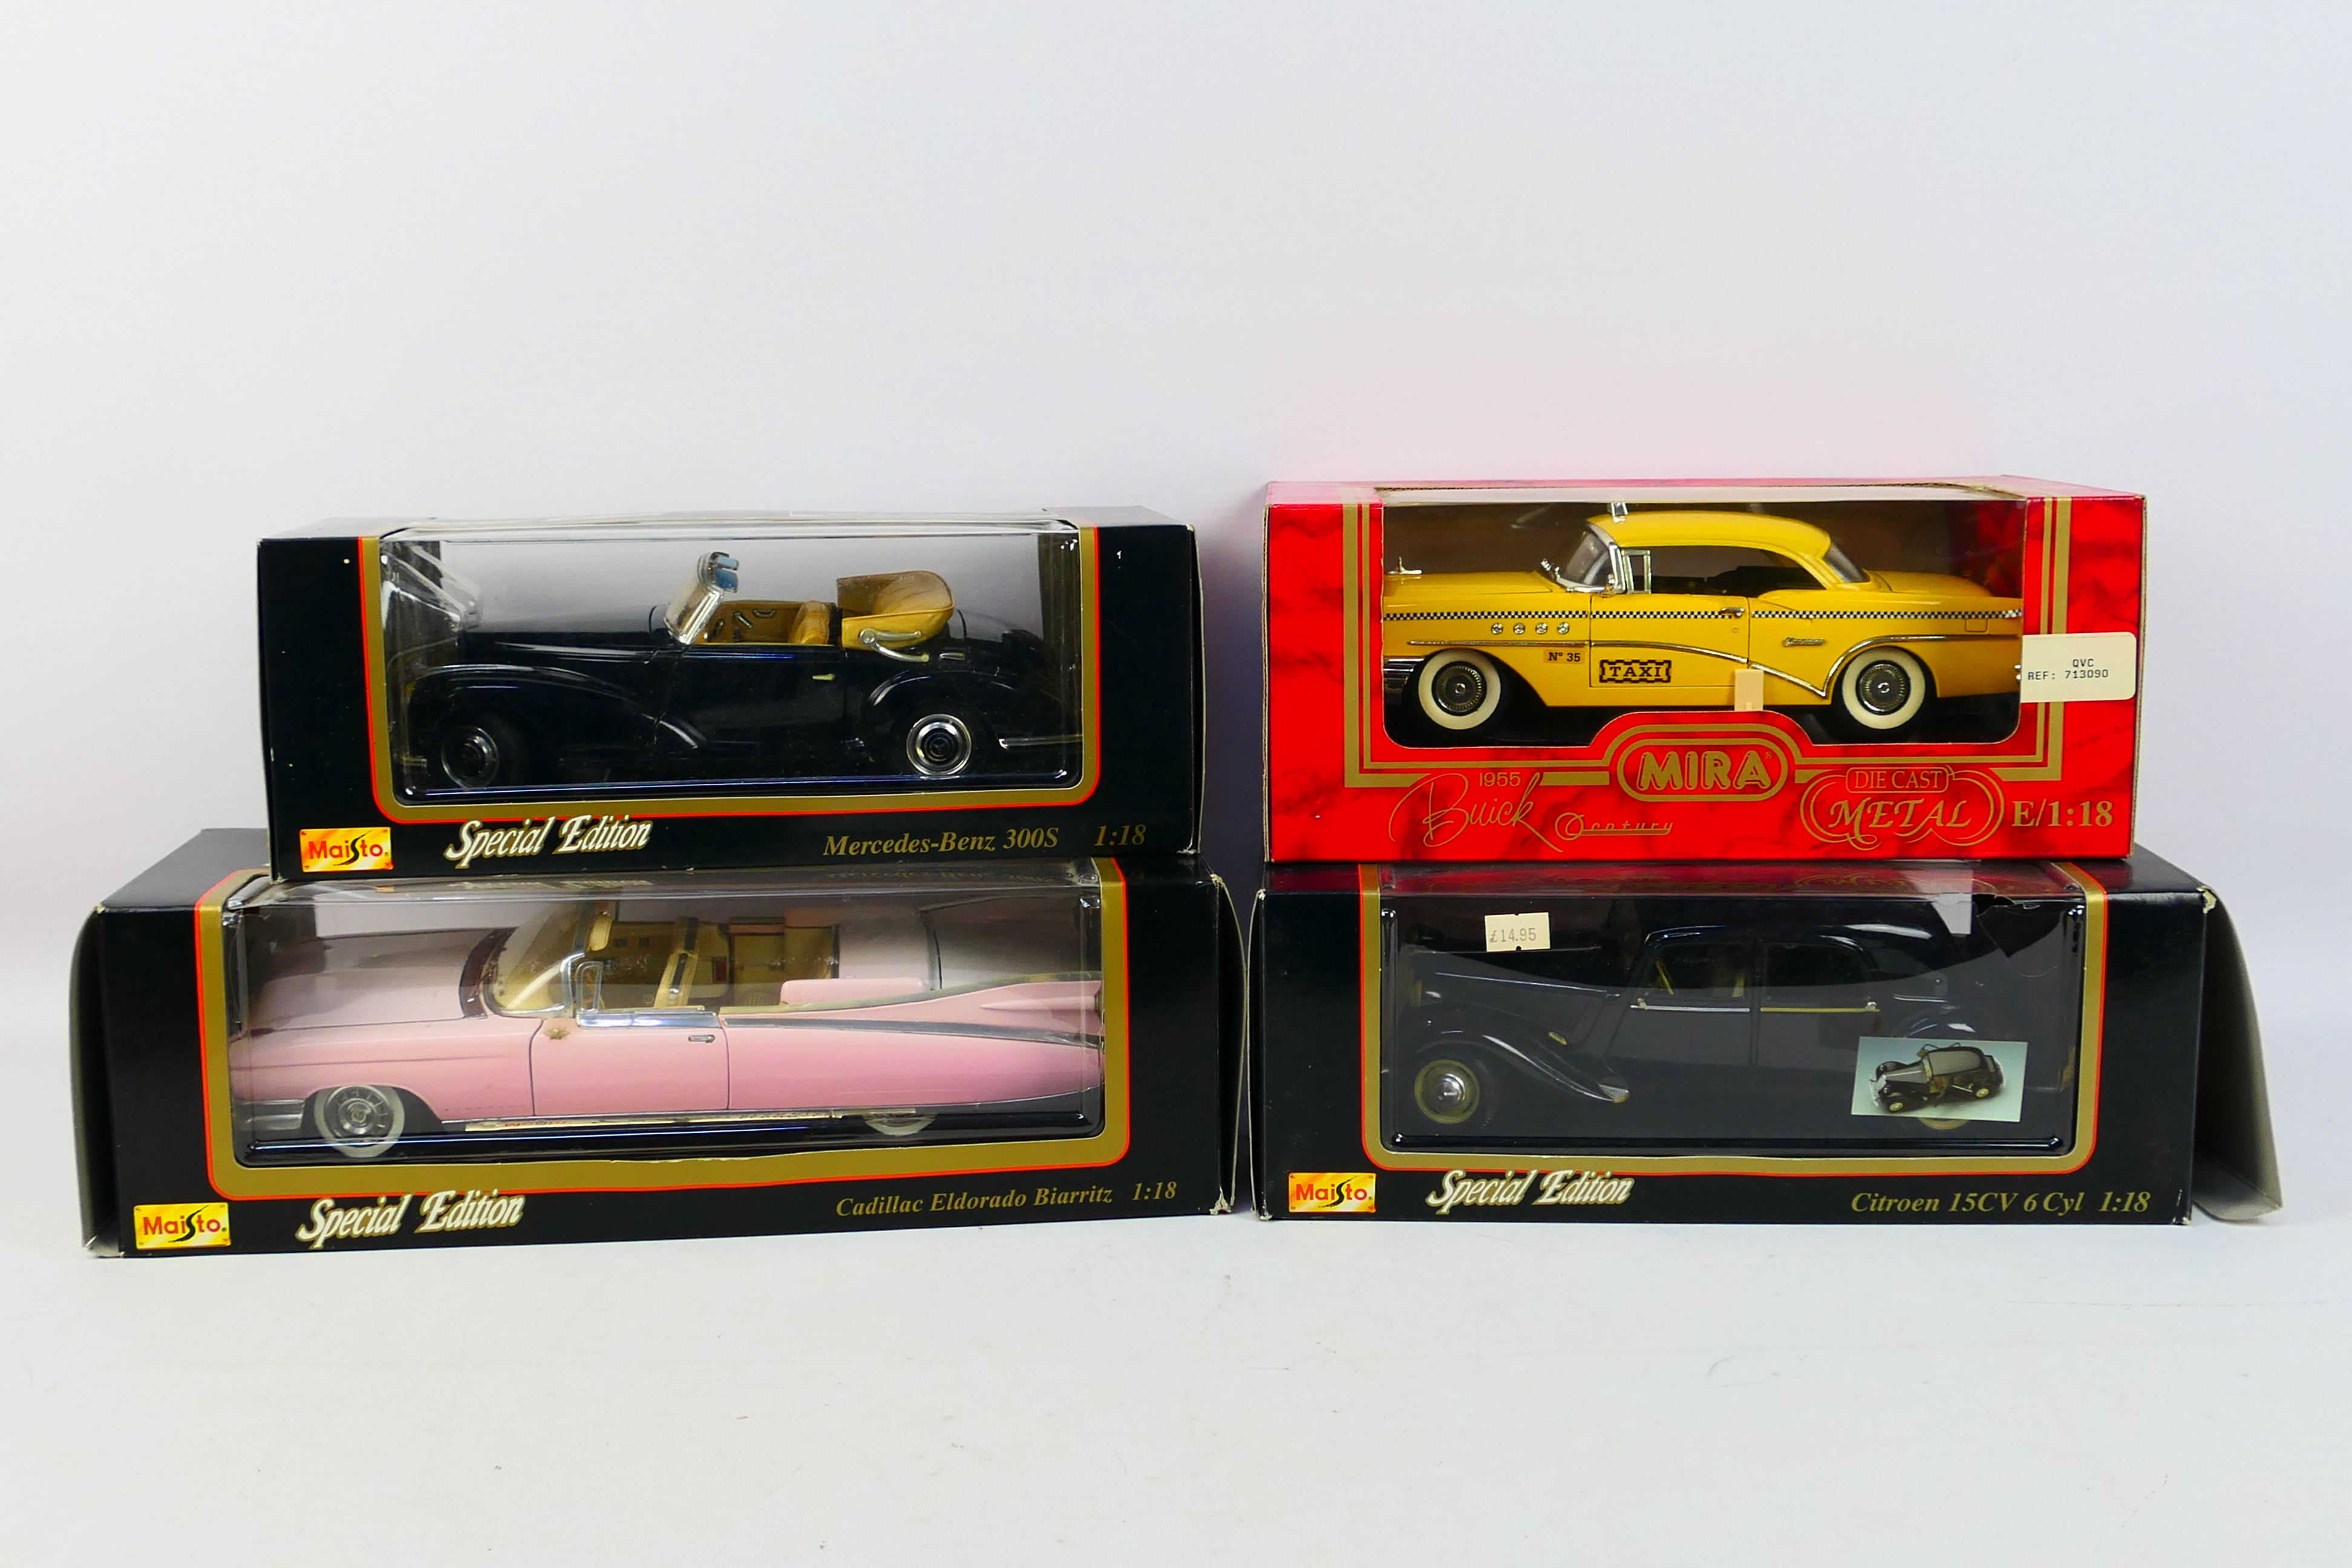 Maisto - Mira - Four boxed diecast 1:18 scale model cars.